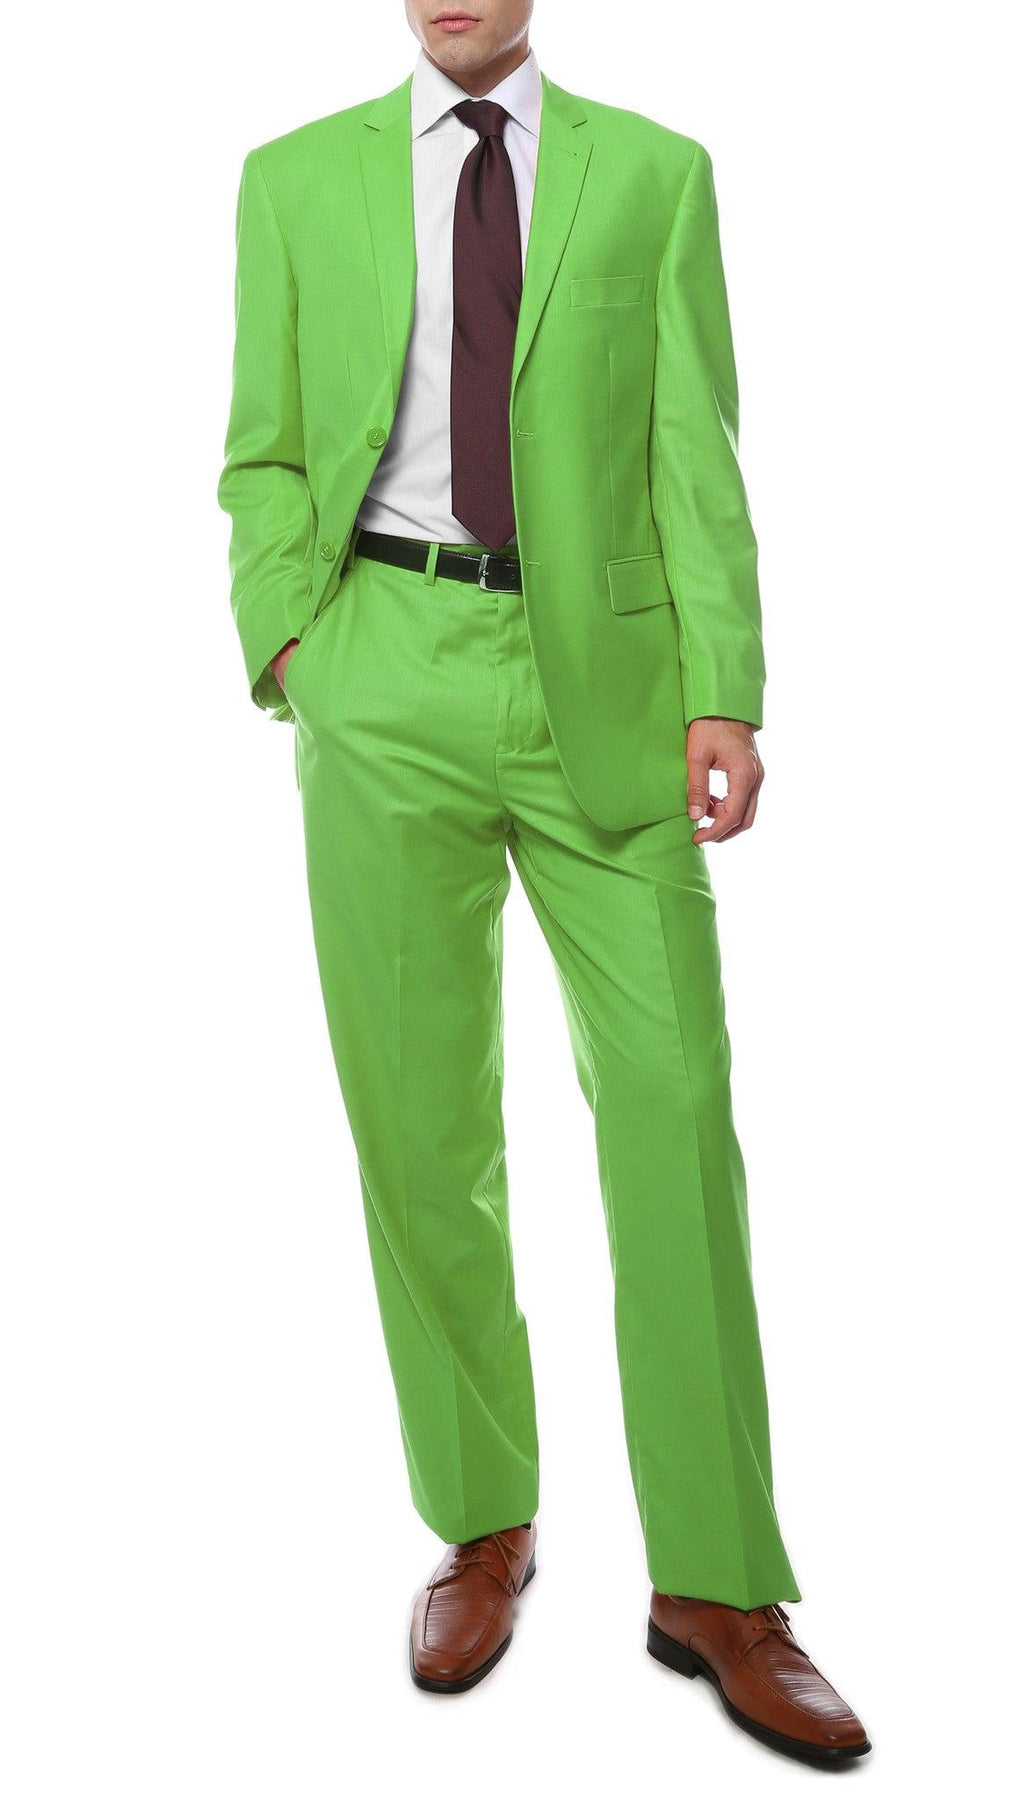 Evan Cool Lime Green Peaked Lapel Close Fitting Prom Men Suit | Allaboutsuit